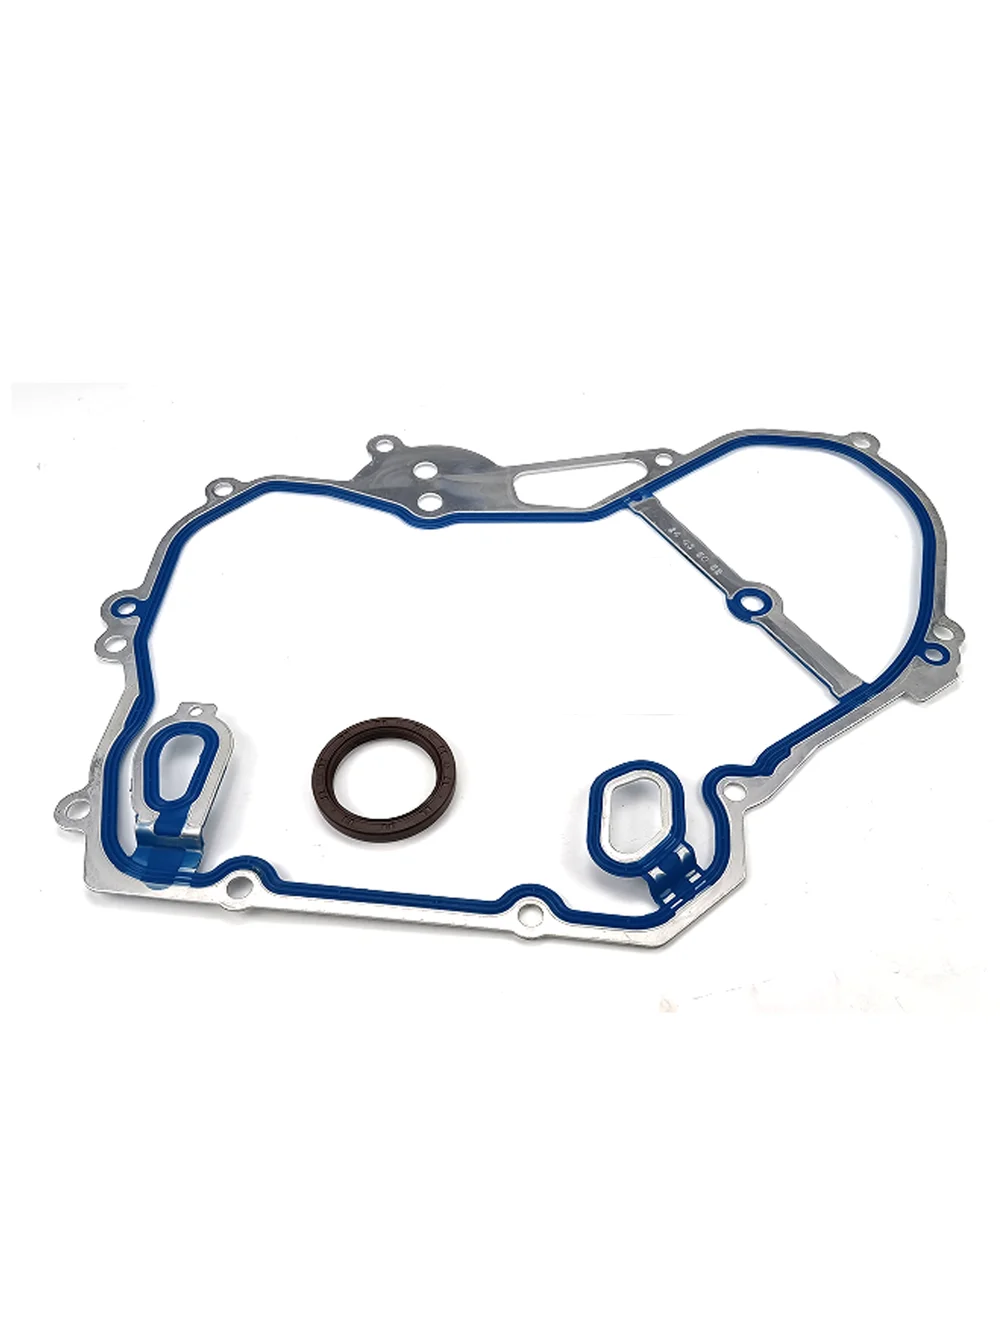 

12584041 JV5068 TCS46079 Timing Cover Gasket For 04-16 Chery GMC for Buick Allure Saturn 2.2L 2.4L DOHC